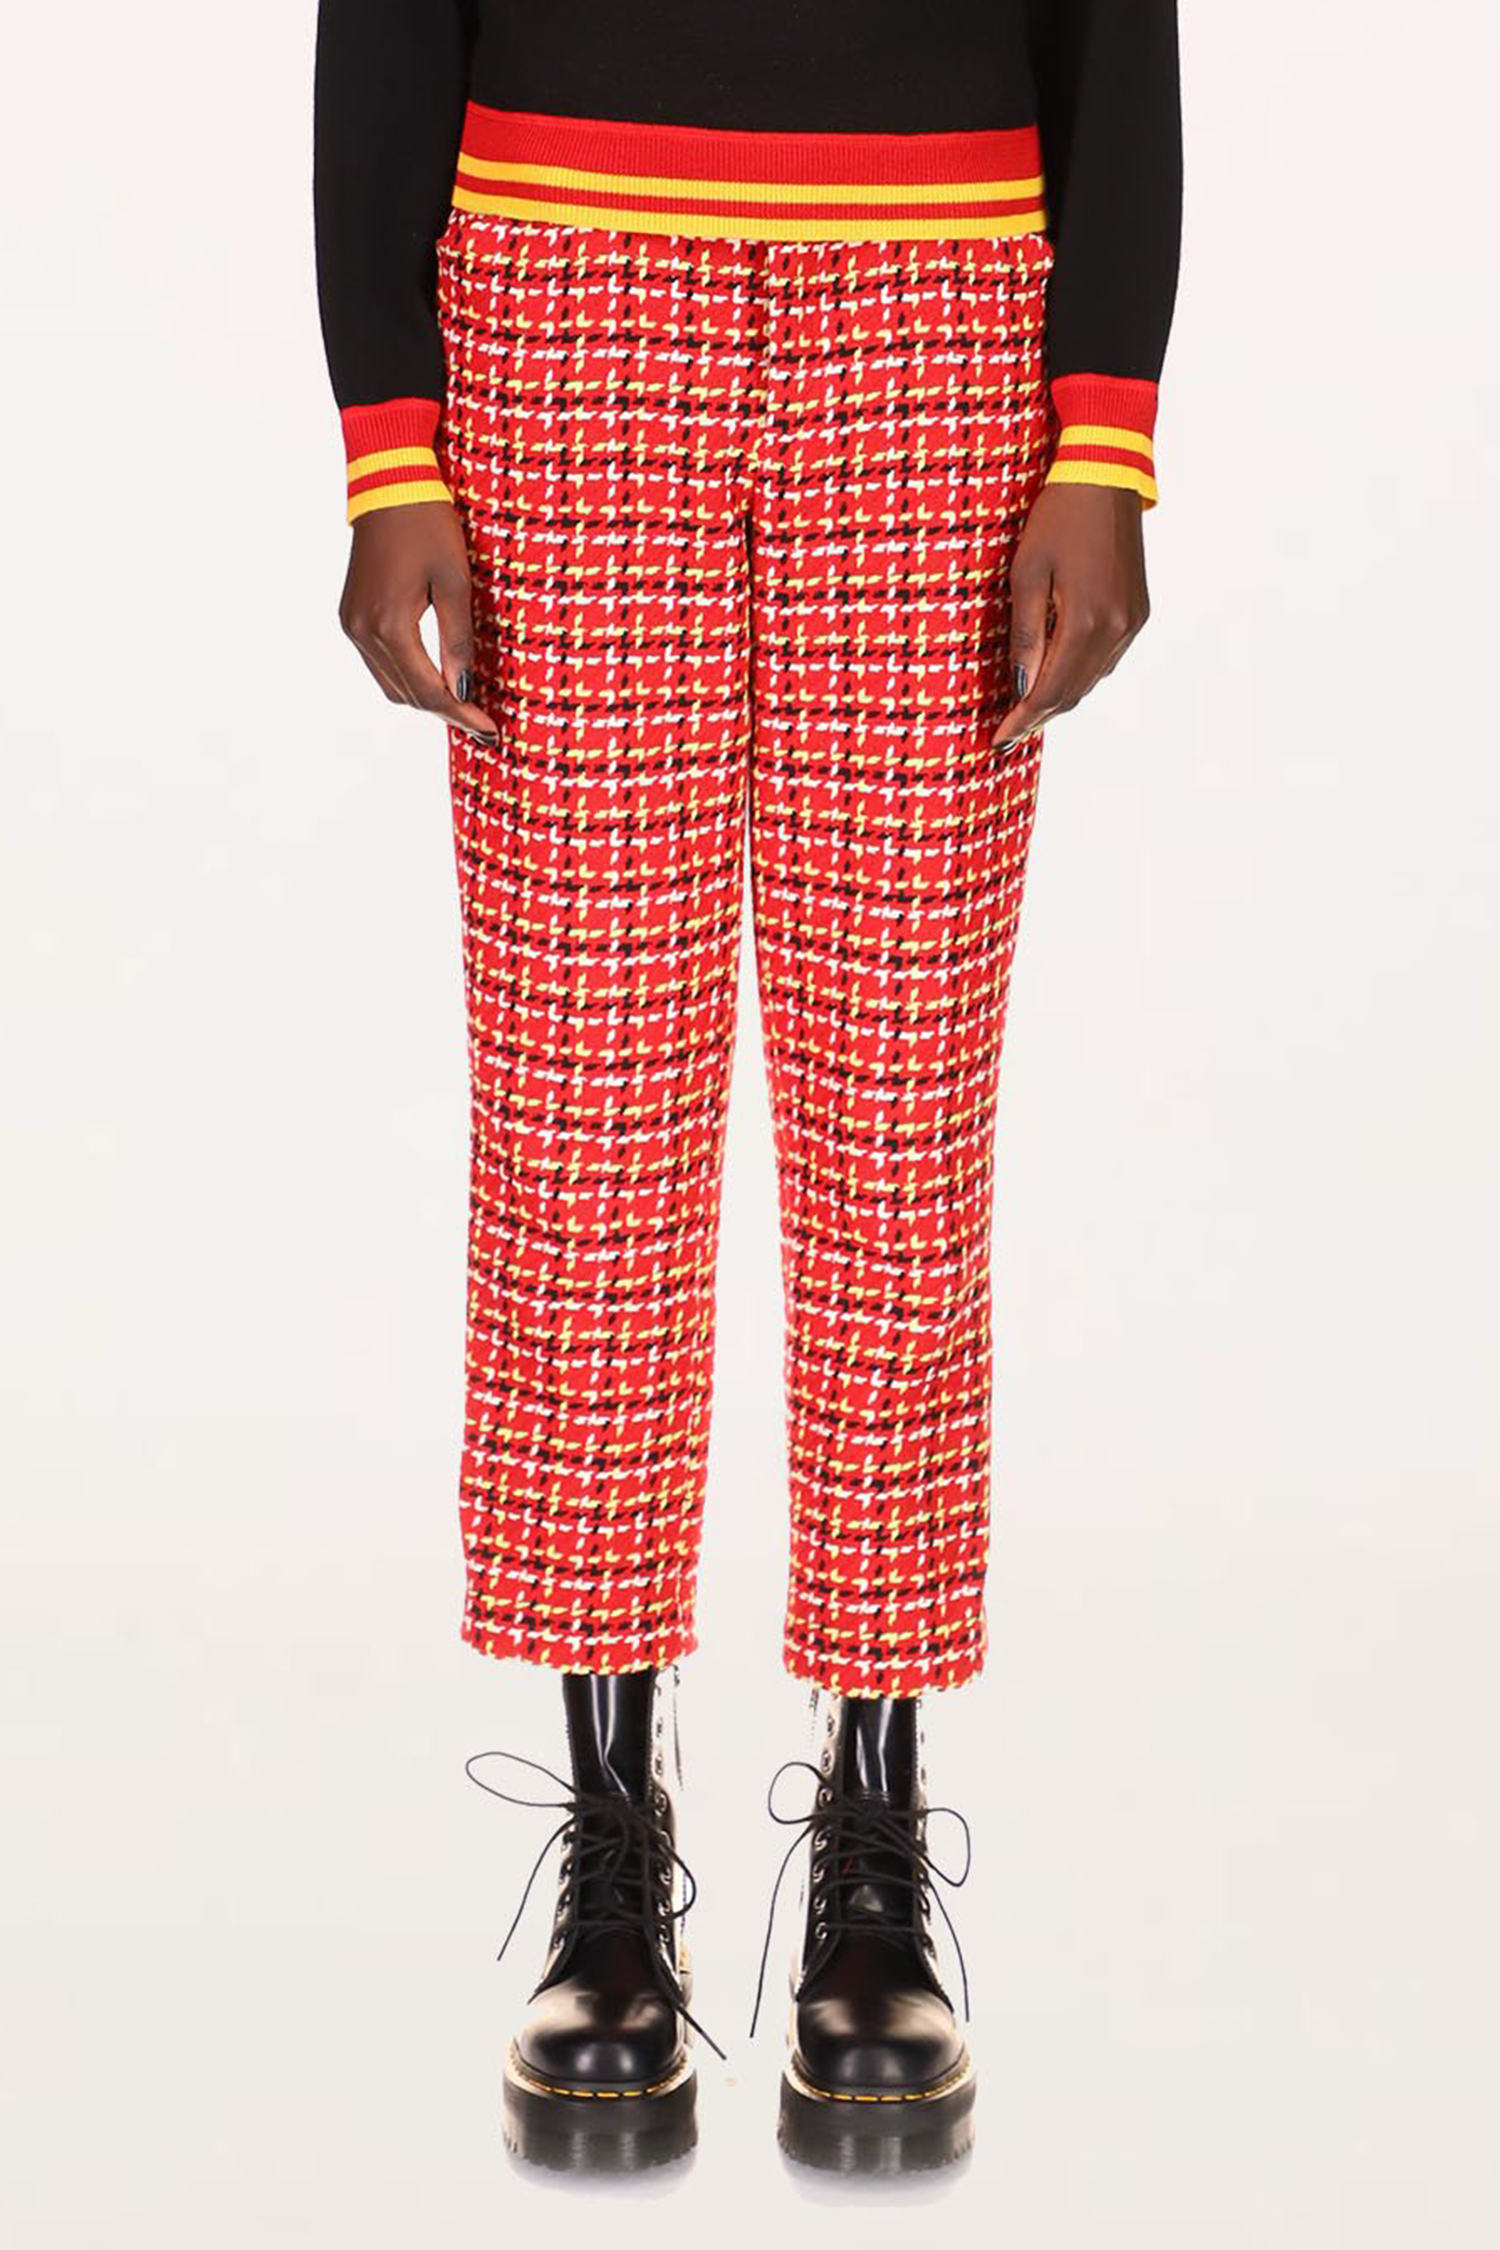 Neo Plaid Pants Red, above ankles long, bright yellow and orange belt line, mainly orange red color